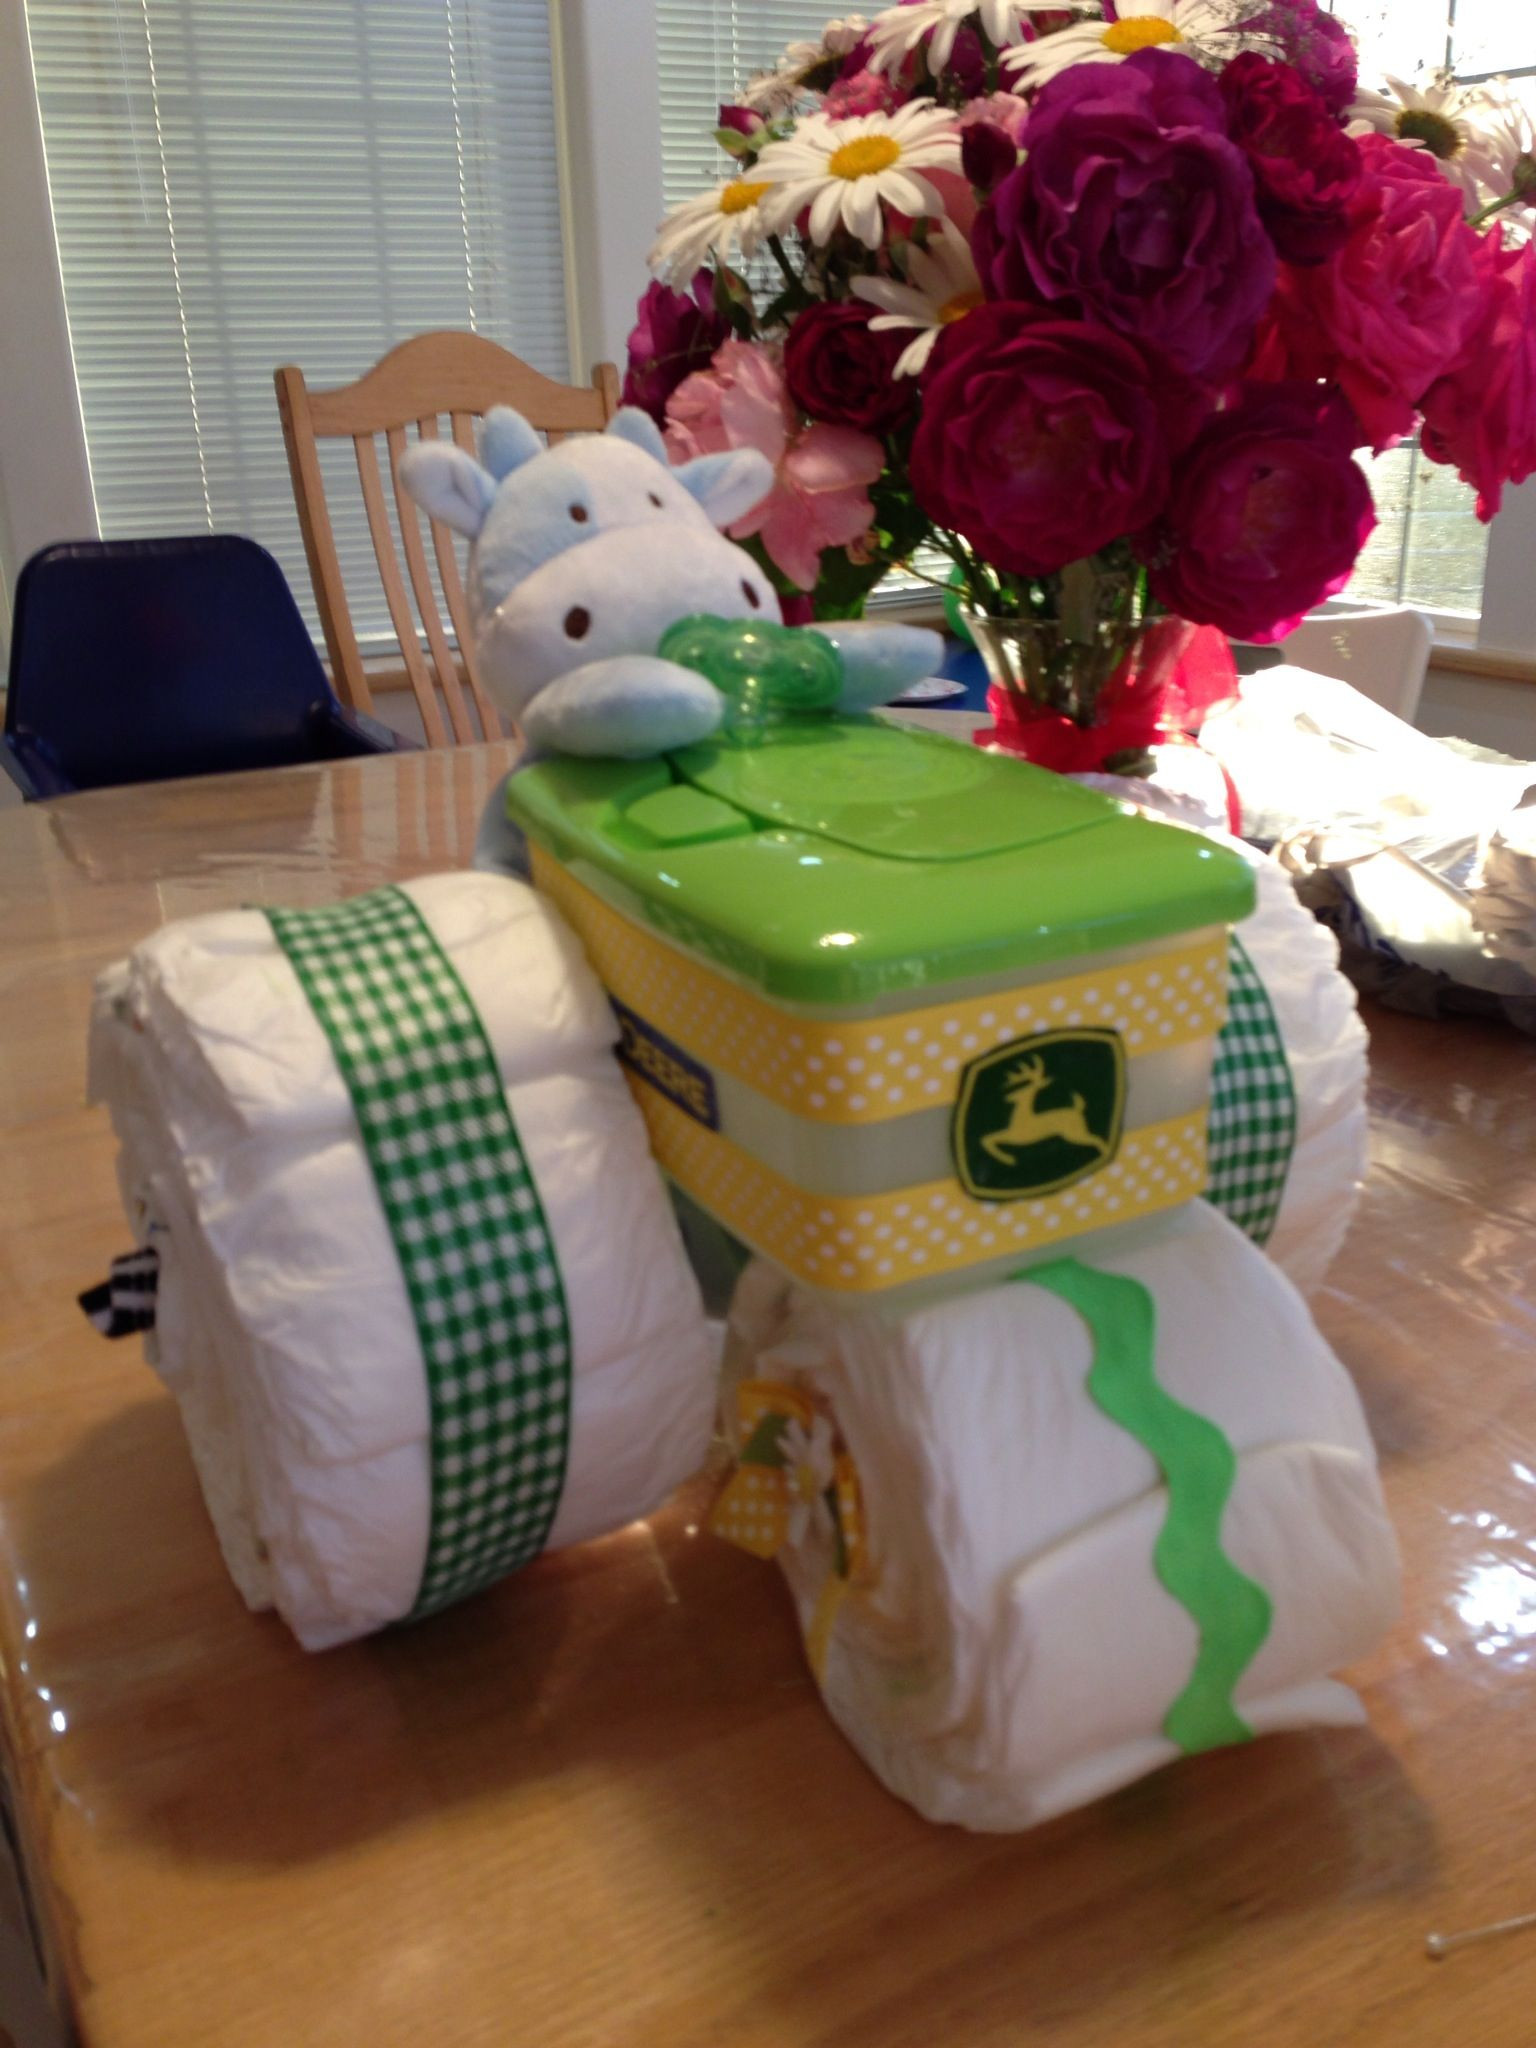 Baby Shower Gifts Made From Diapers
 Diaper tractor for my daughter s new baby in 2019